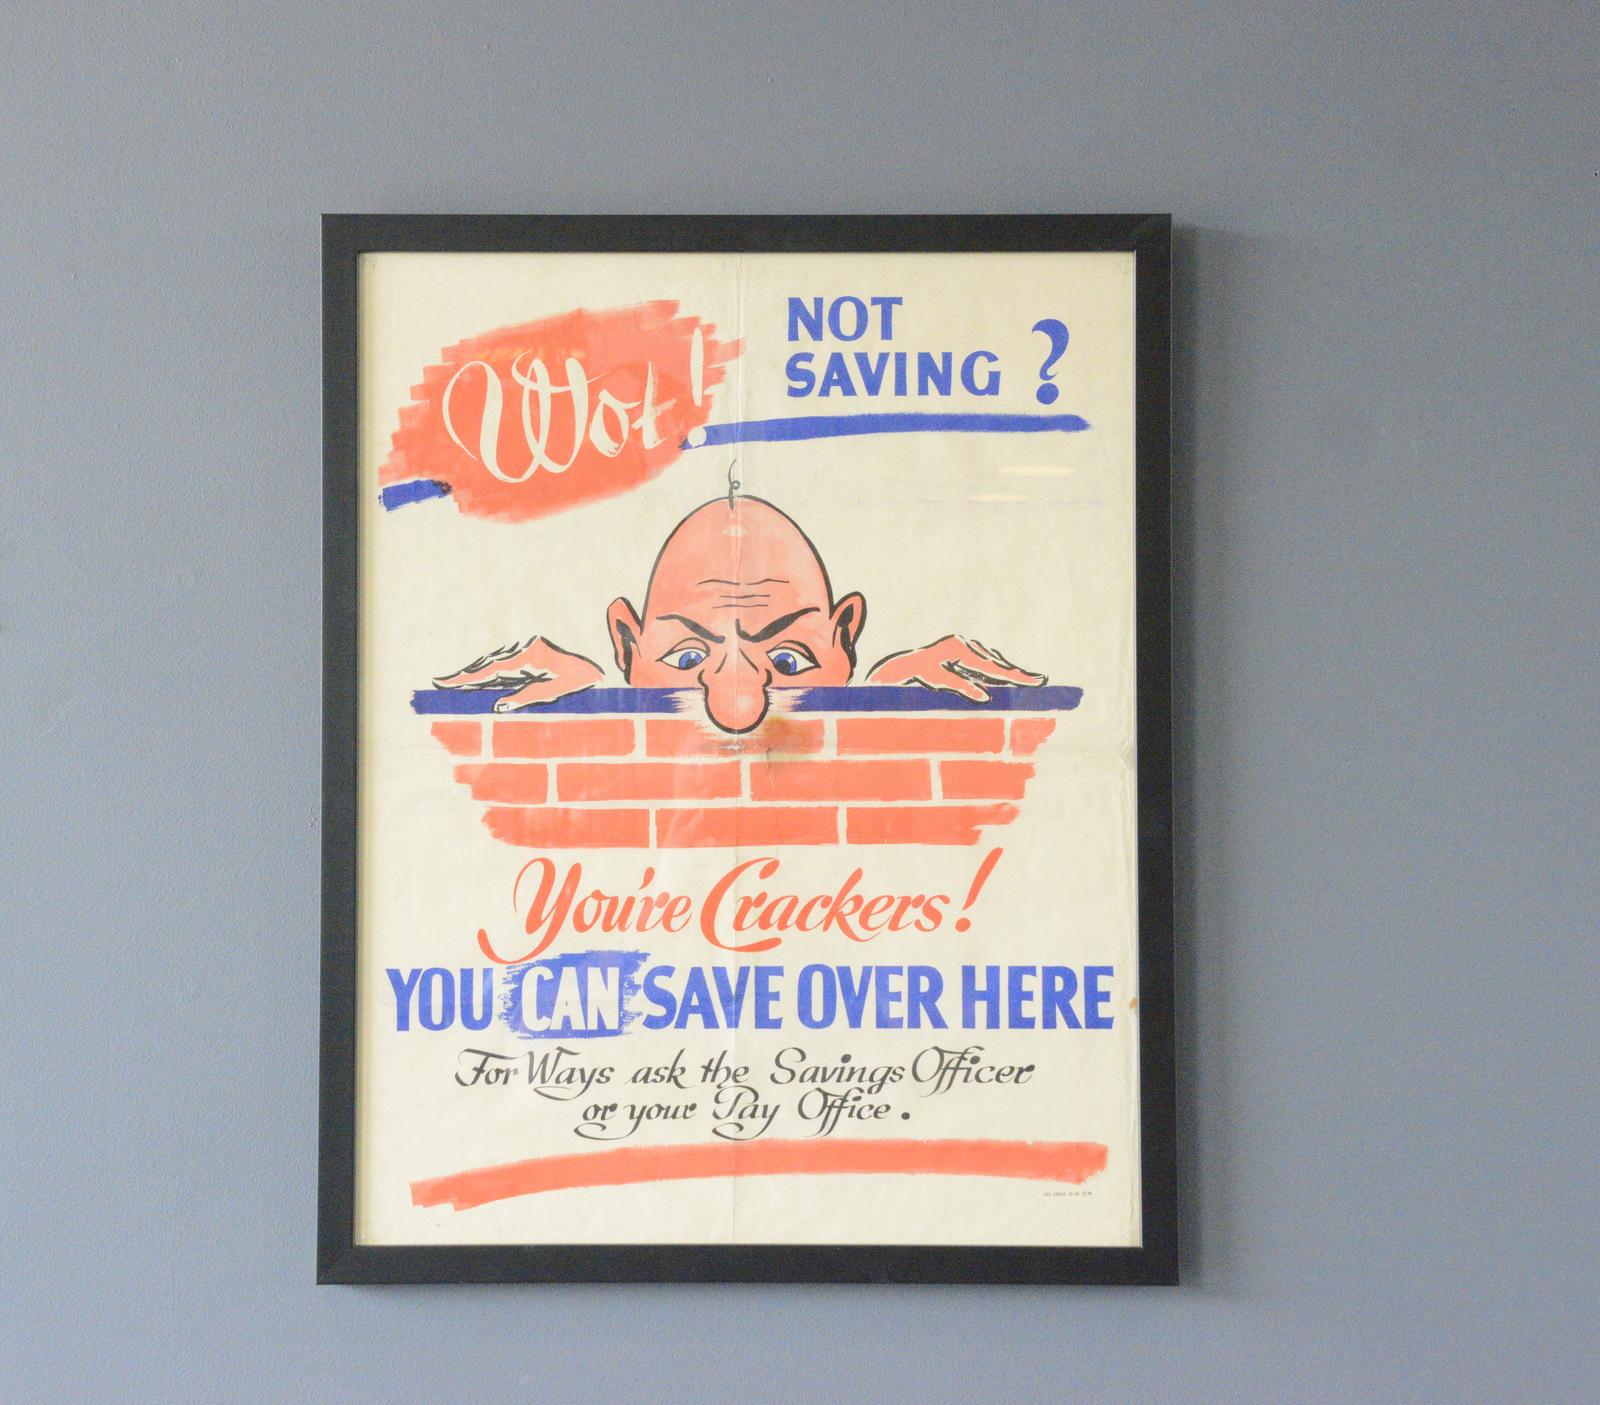 Mr Chad WW2 National Savings Poster Circa 1940s

- Original WW2 national savings poster
- Features one of the first illustrations of Mr Chad
- Framed in a Black wooden frame with glass front
- English ~ 1940s
- 53cm wide x 60cm tall

Mr Chad

This